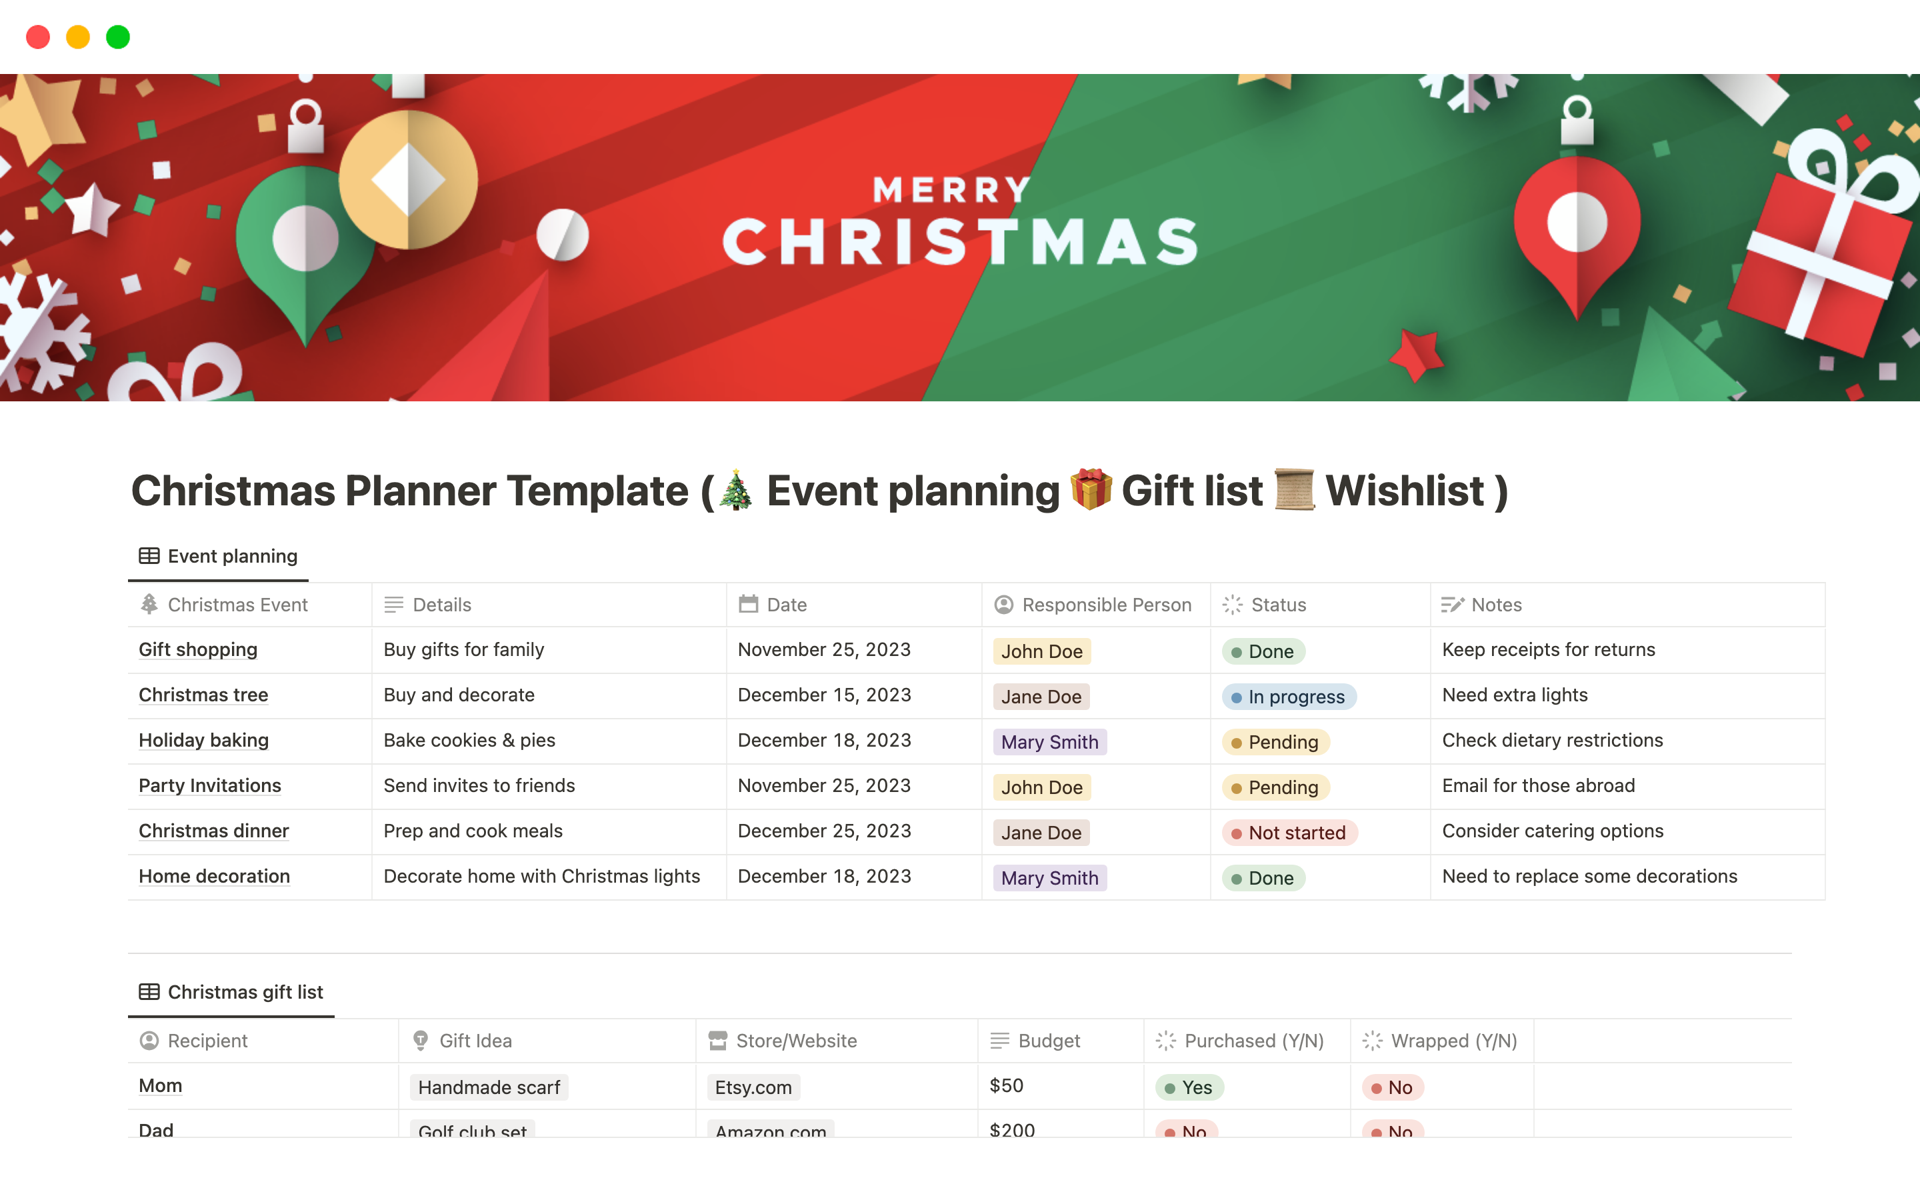 The Christmas Planner Template organizes holiday tasks, assigns responsibilities, and tracks progress, ensuring a stress-free celebration.